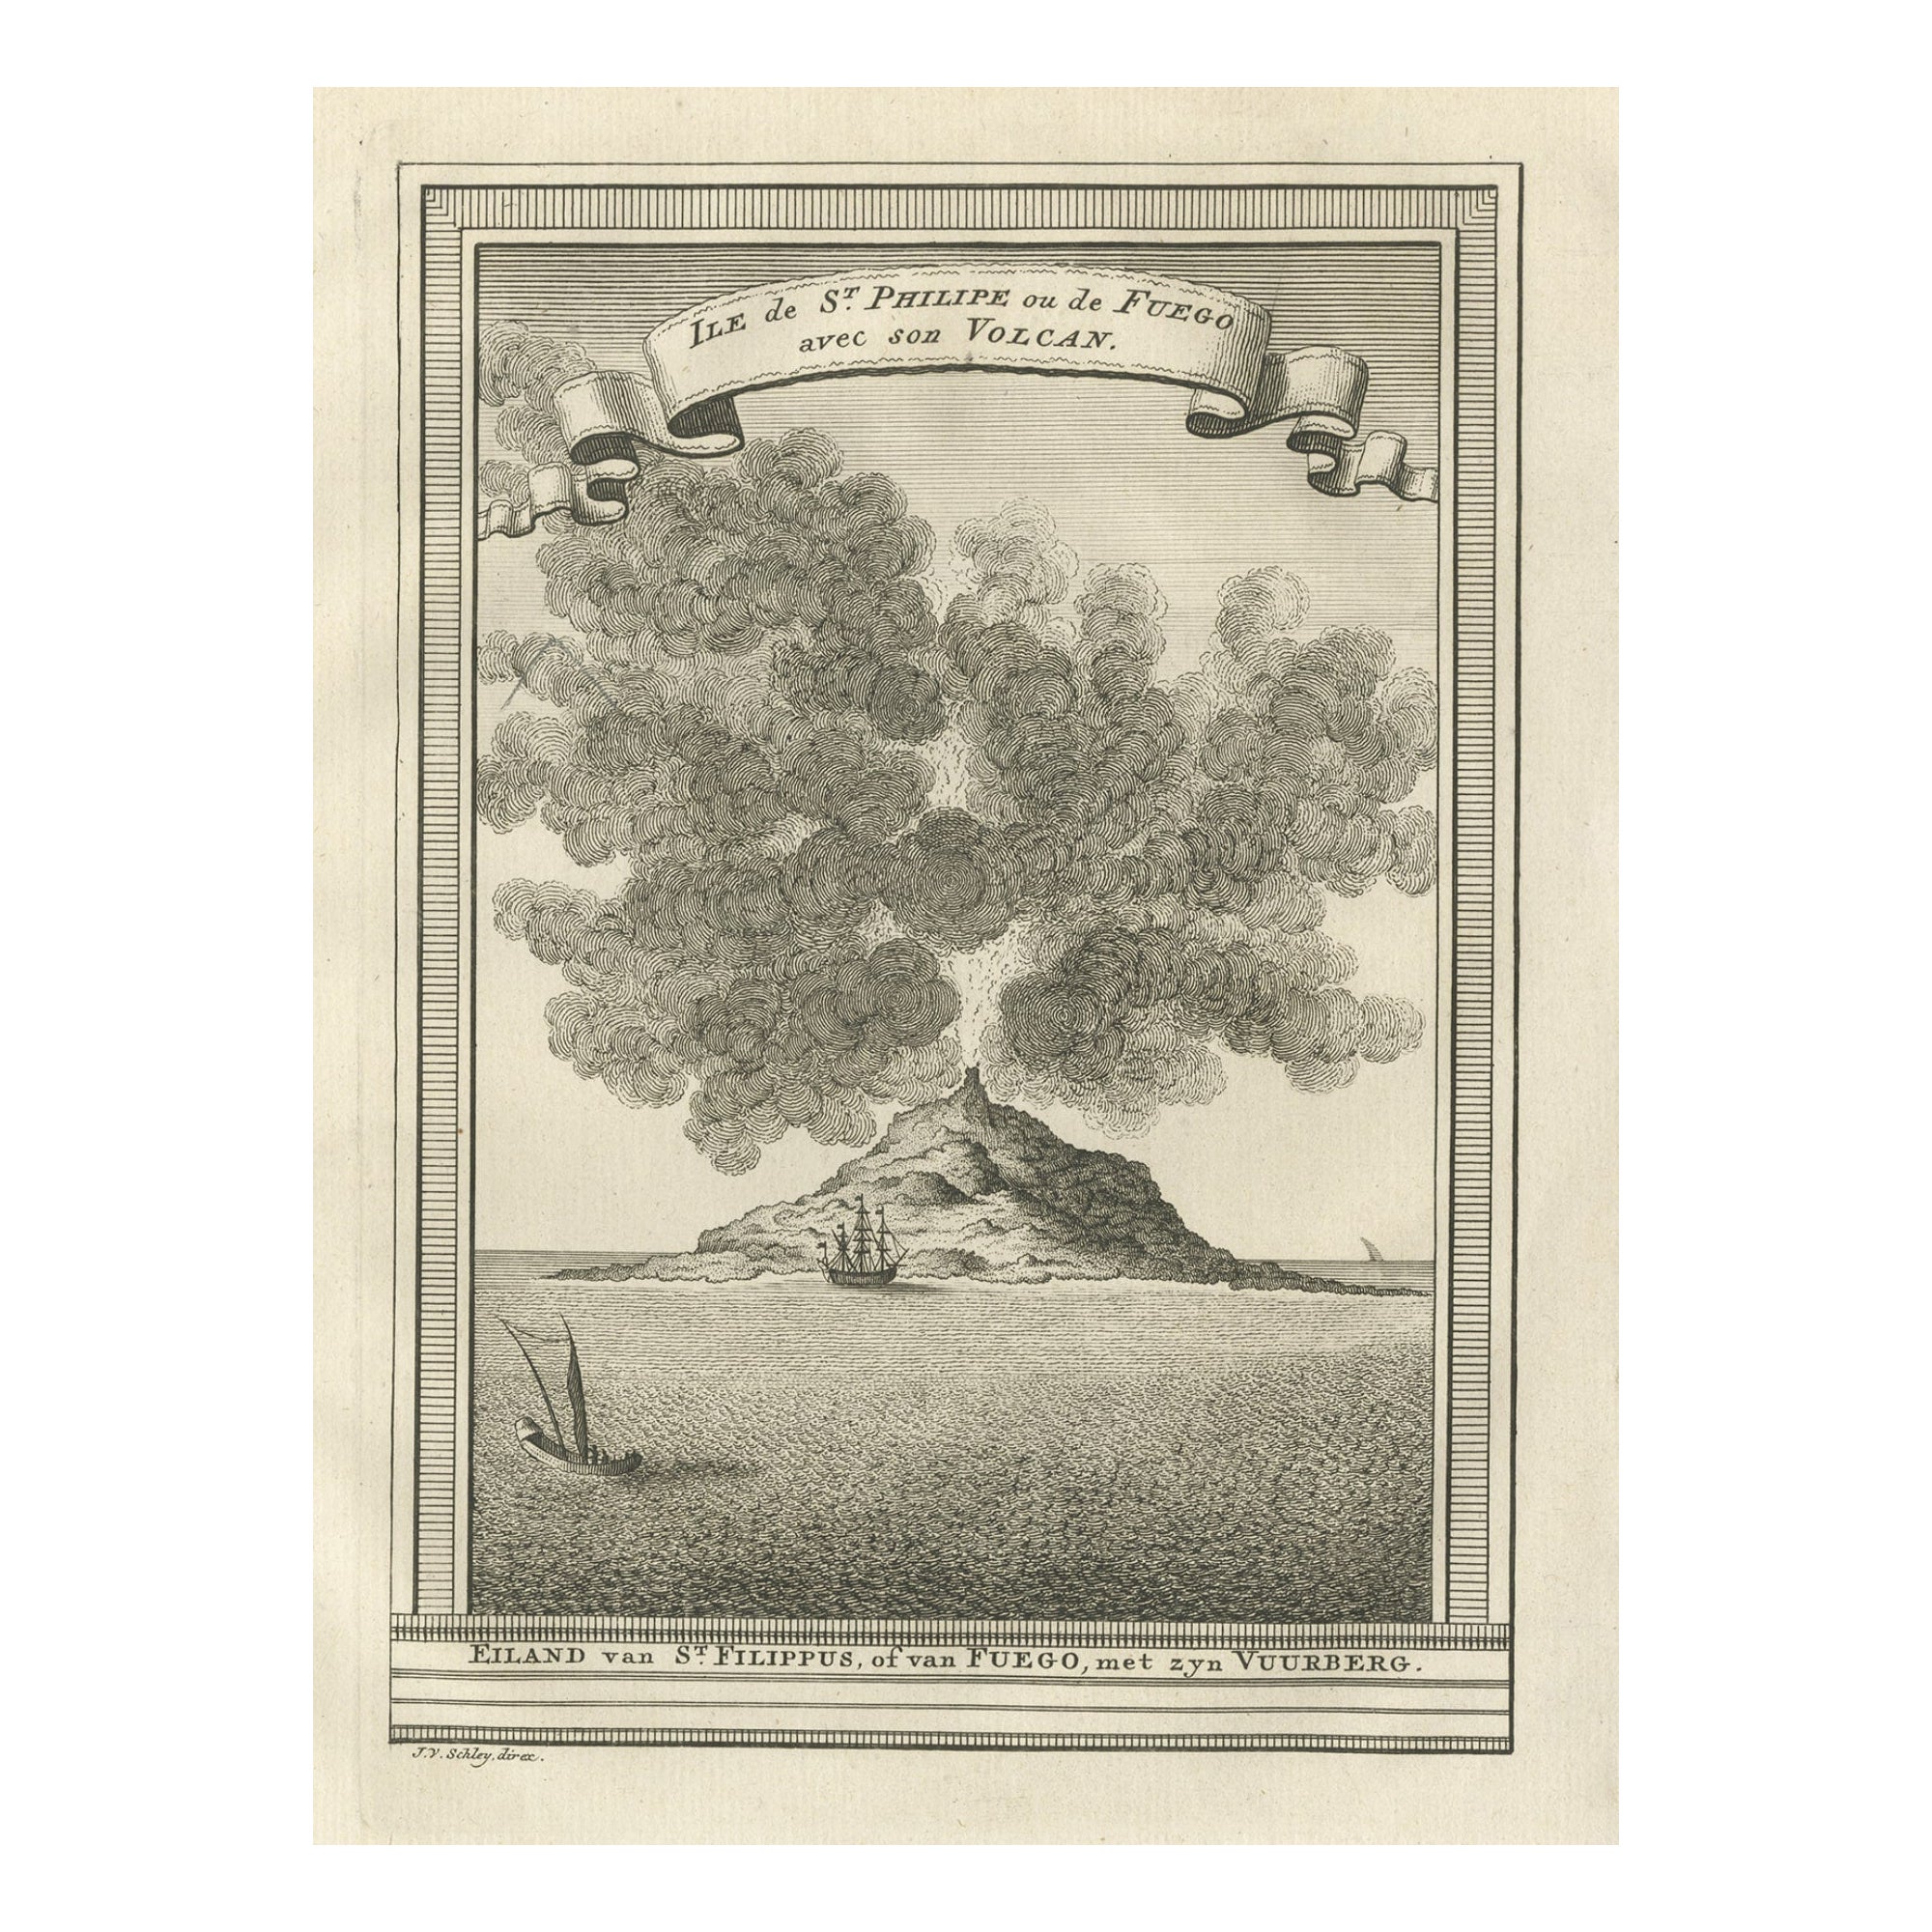 Old Engraving of Volcano Piton de la Fournaise on Reunion Island, c.1750 For Sale